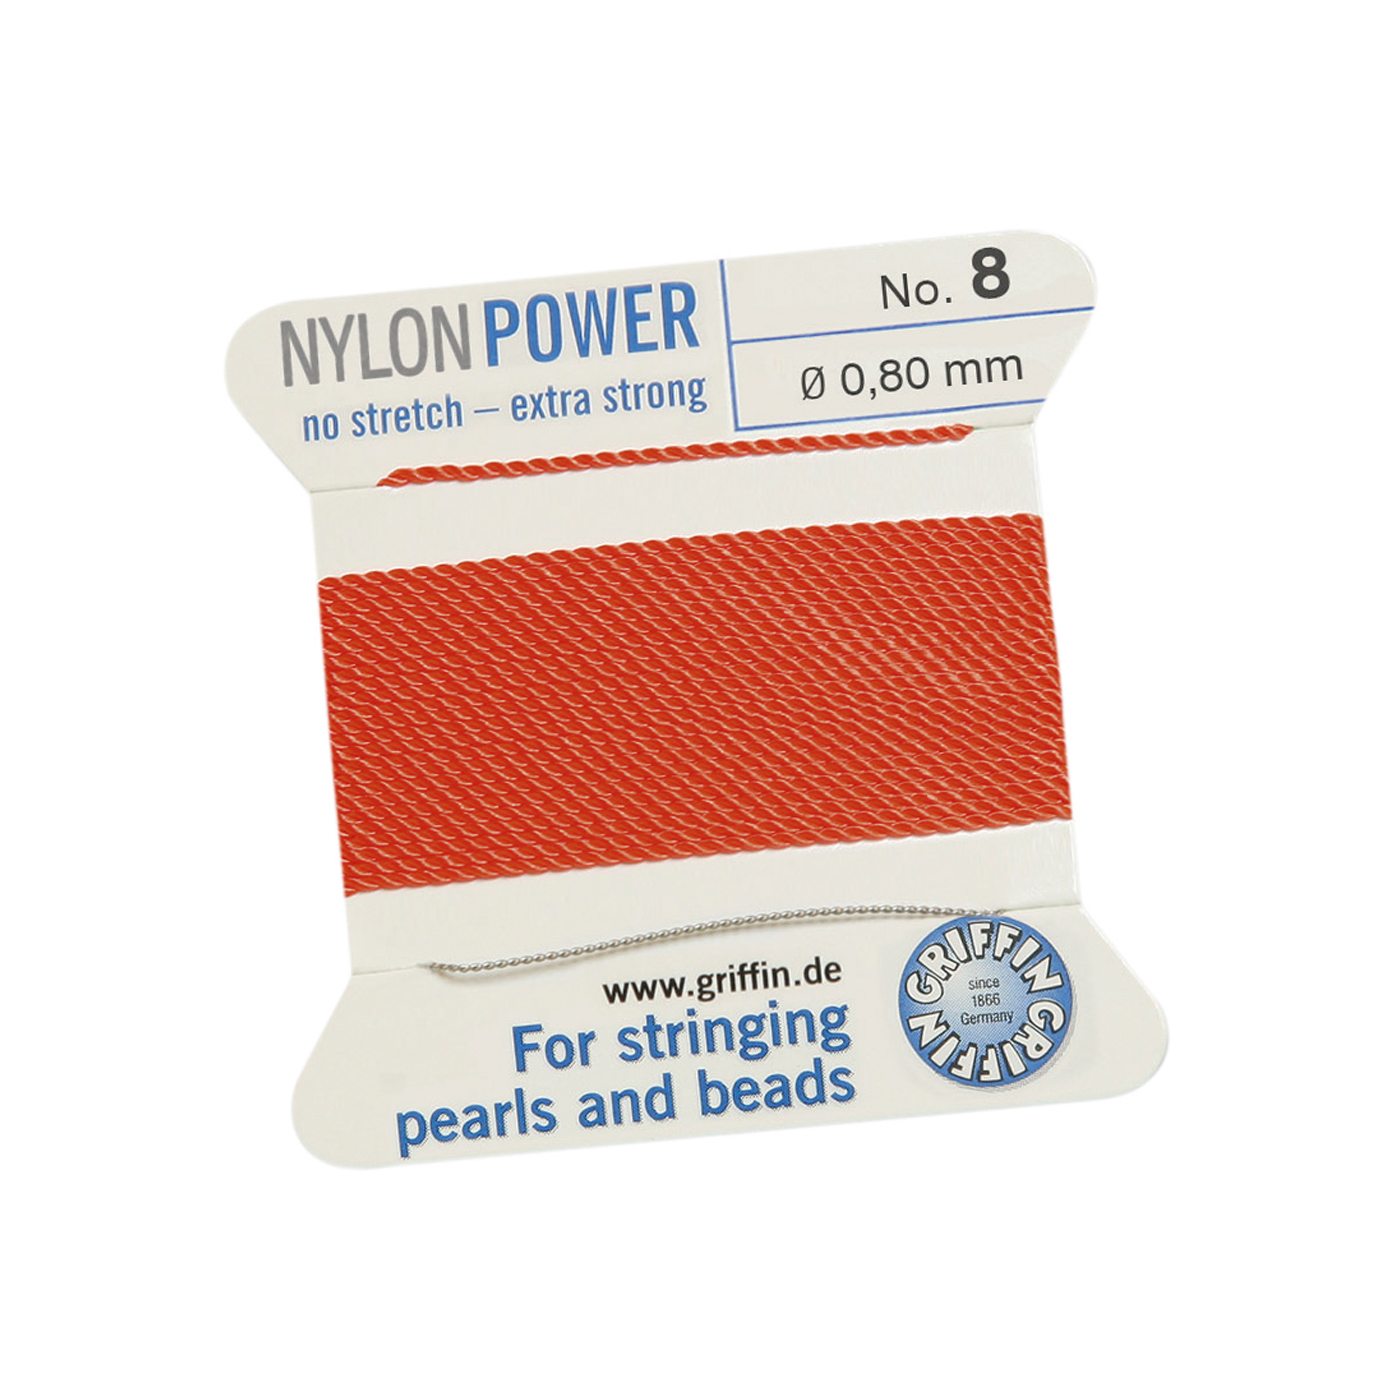 Bead Cord NylonPower, Coral Red, No. 8 - 2 m